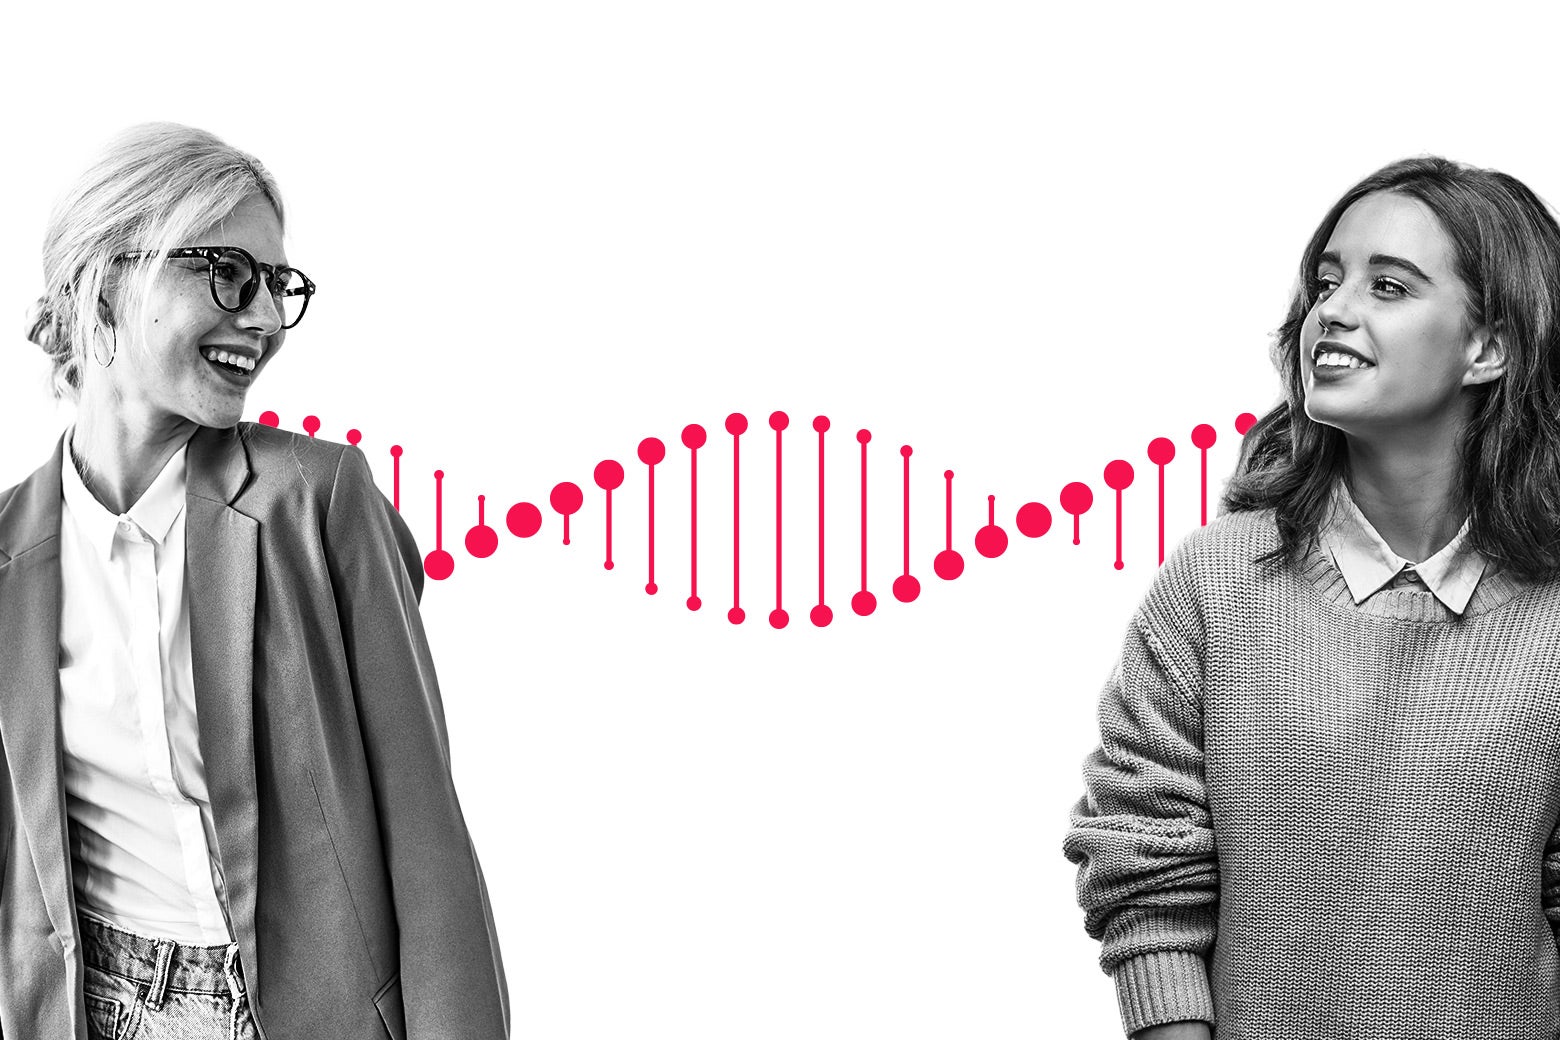 Two people look at each other with an illustrated strand of DNA connecting them.